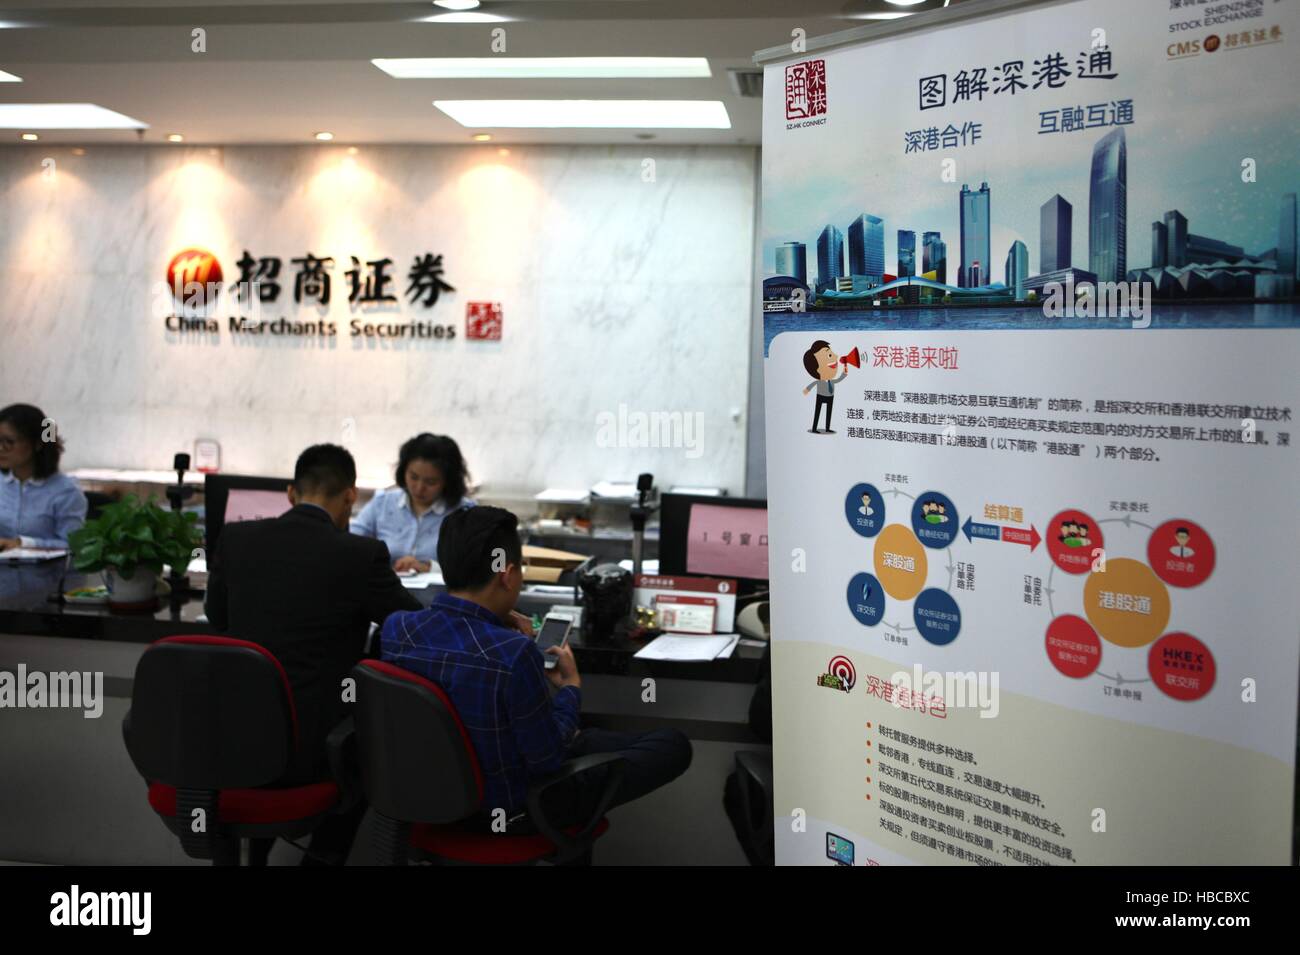 Shenzhen. 5th Dec, 2016. Photo taken on Dec. 5, 2016 shows a poster about the launching of the Shenzhen-Hong Kong Stock Connect in a securities company in Shenzhen, south China's Guangdong Province. The Shenzhen-Hong Kong Stock Connect, the second link between bourses in the Chinese mainland and Hong Kong, made a debut on Monday. © Wang Dongzhen/Xinhua/Alamy Live News Stock Photo